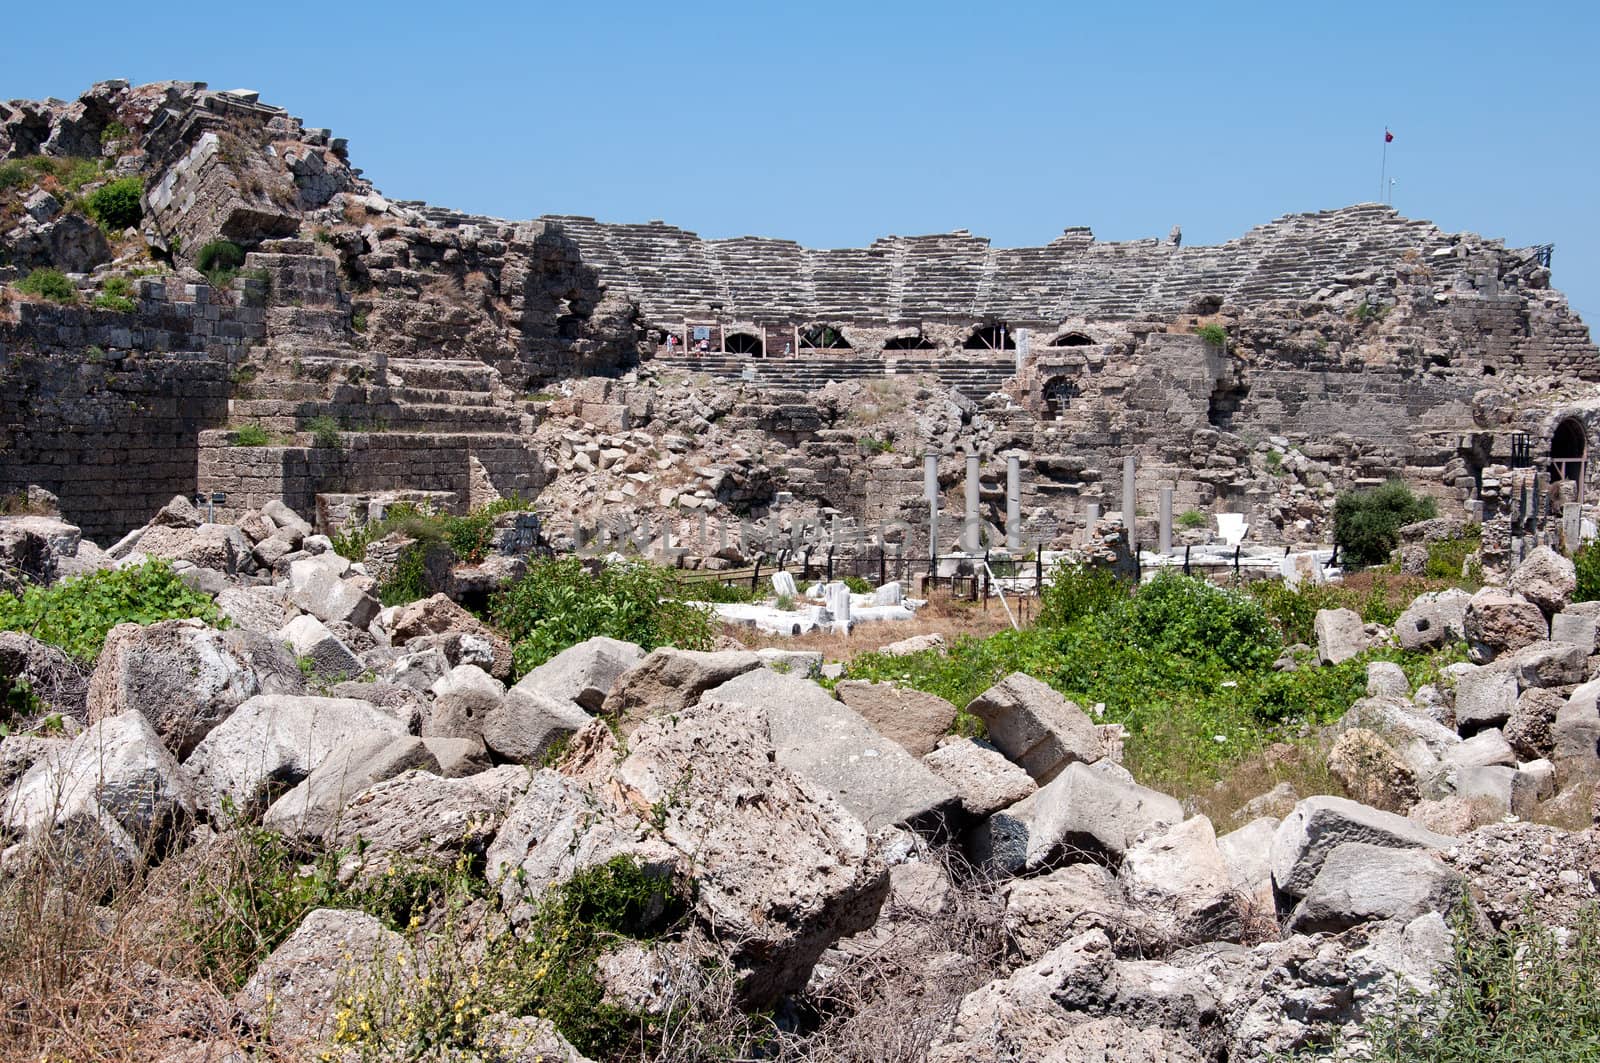 The ruins of the ancient amphitheater in Side, Turkey